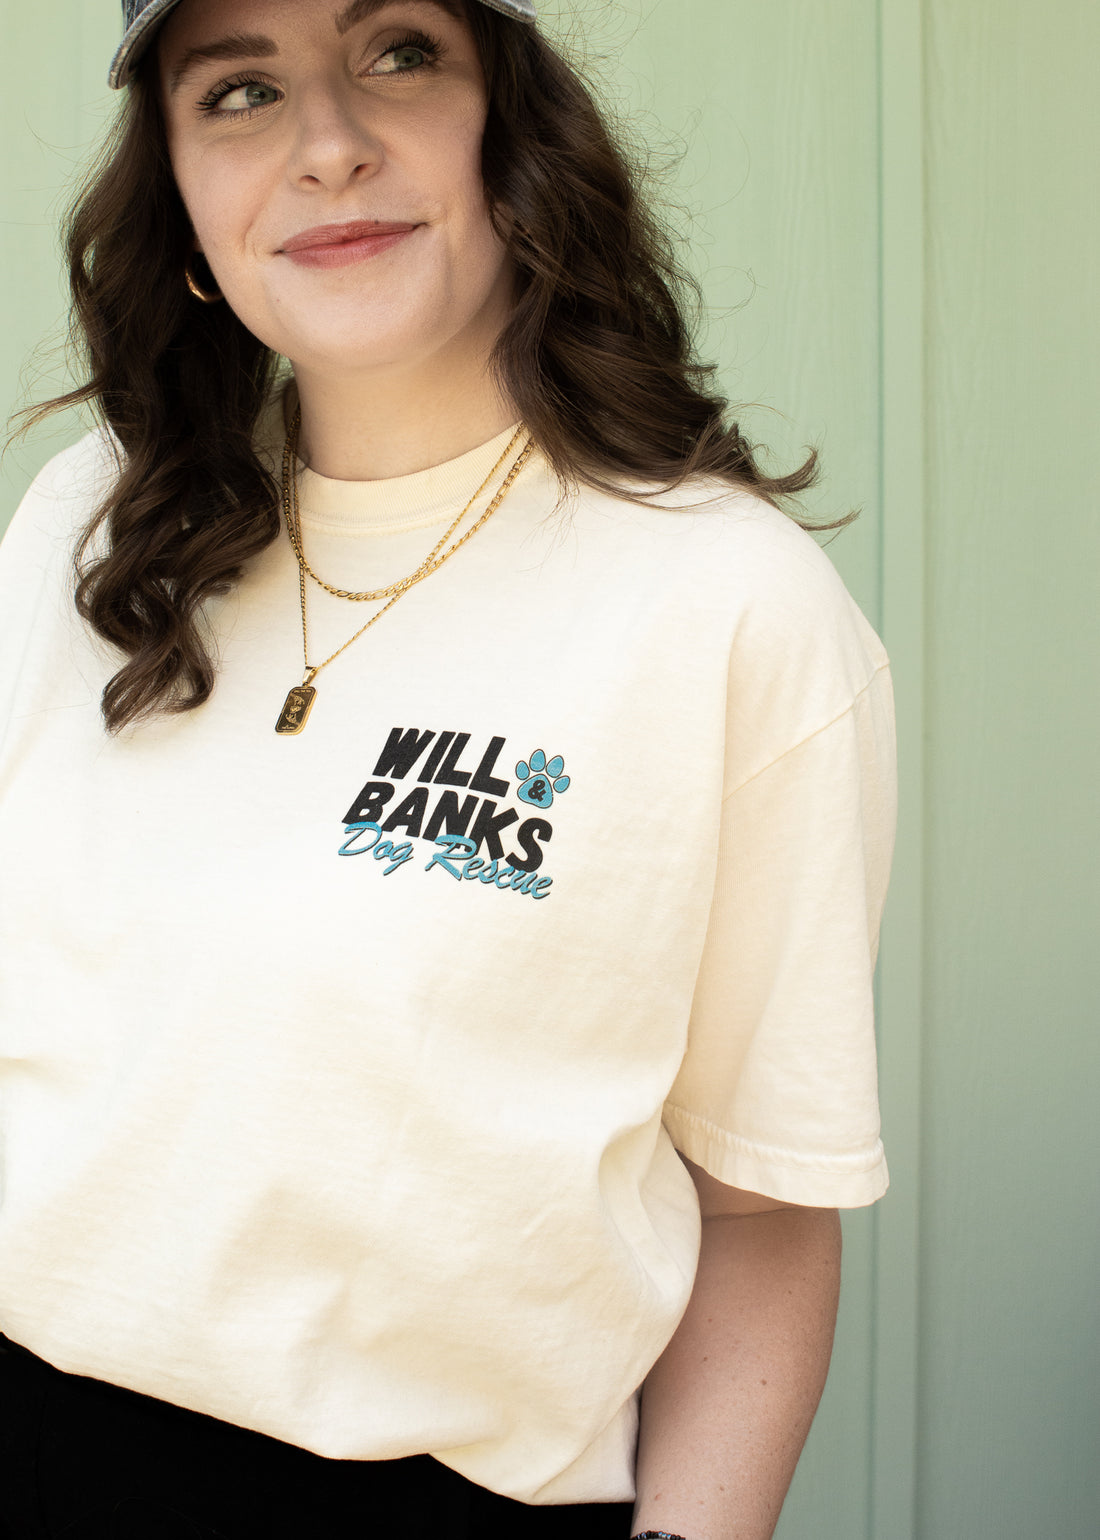 Will and Banks Dog Rescue Tee